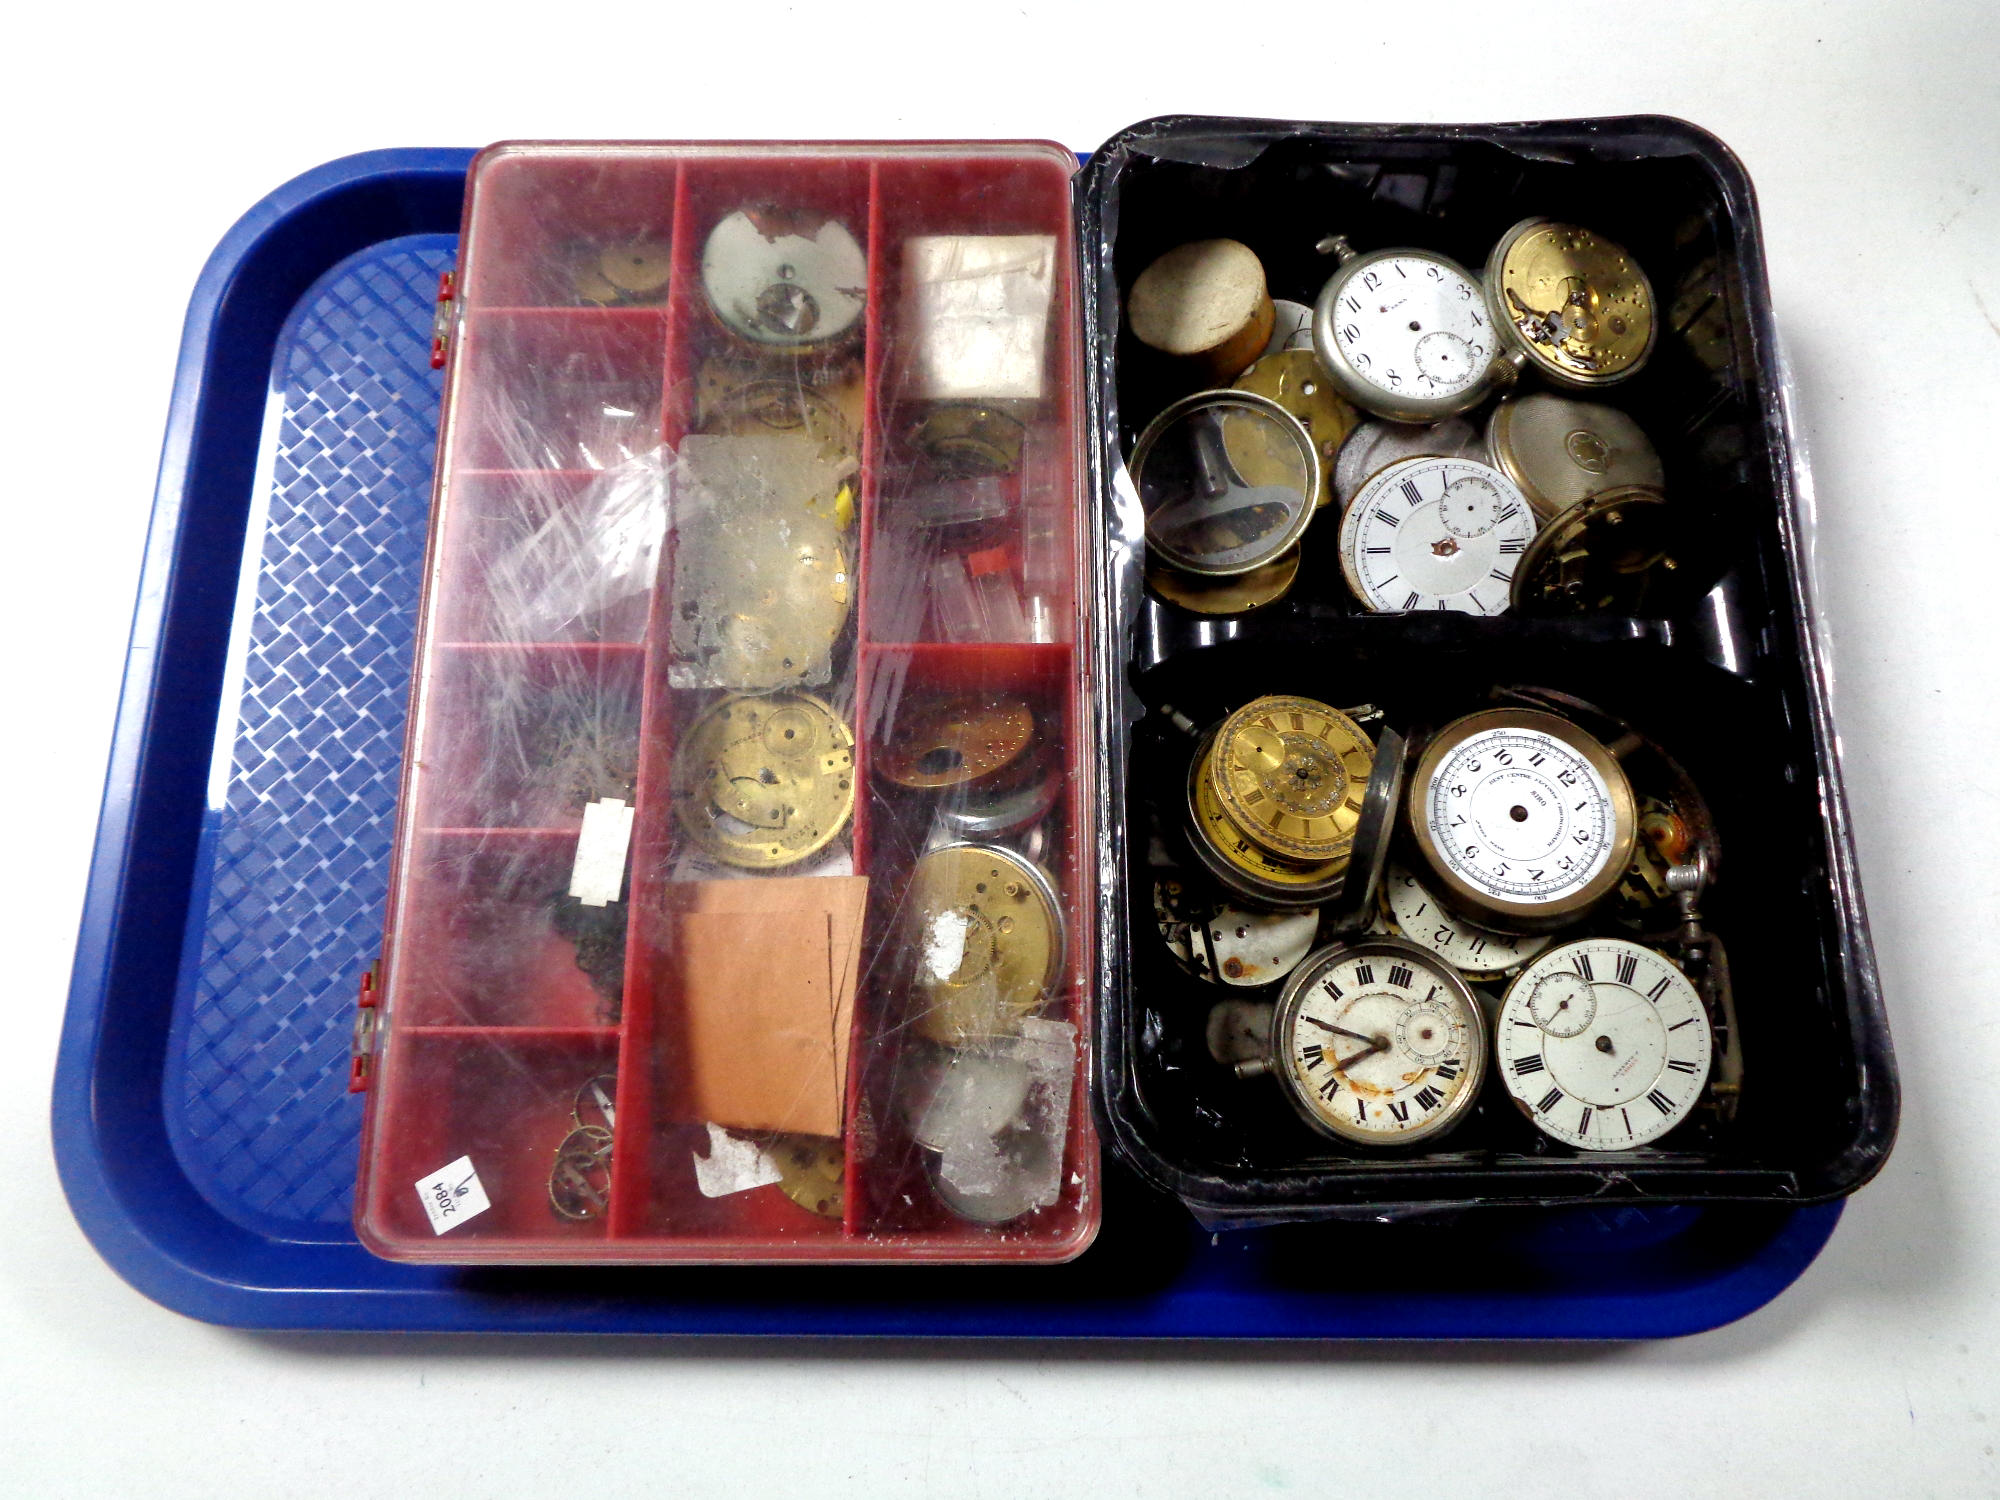 A tray containing horologist's pocket watch parts